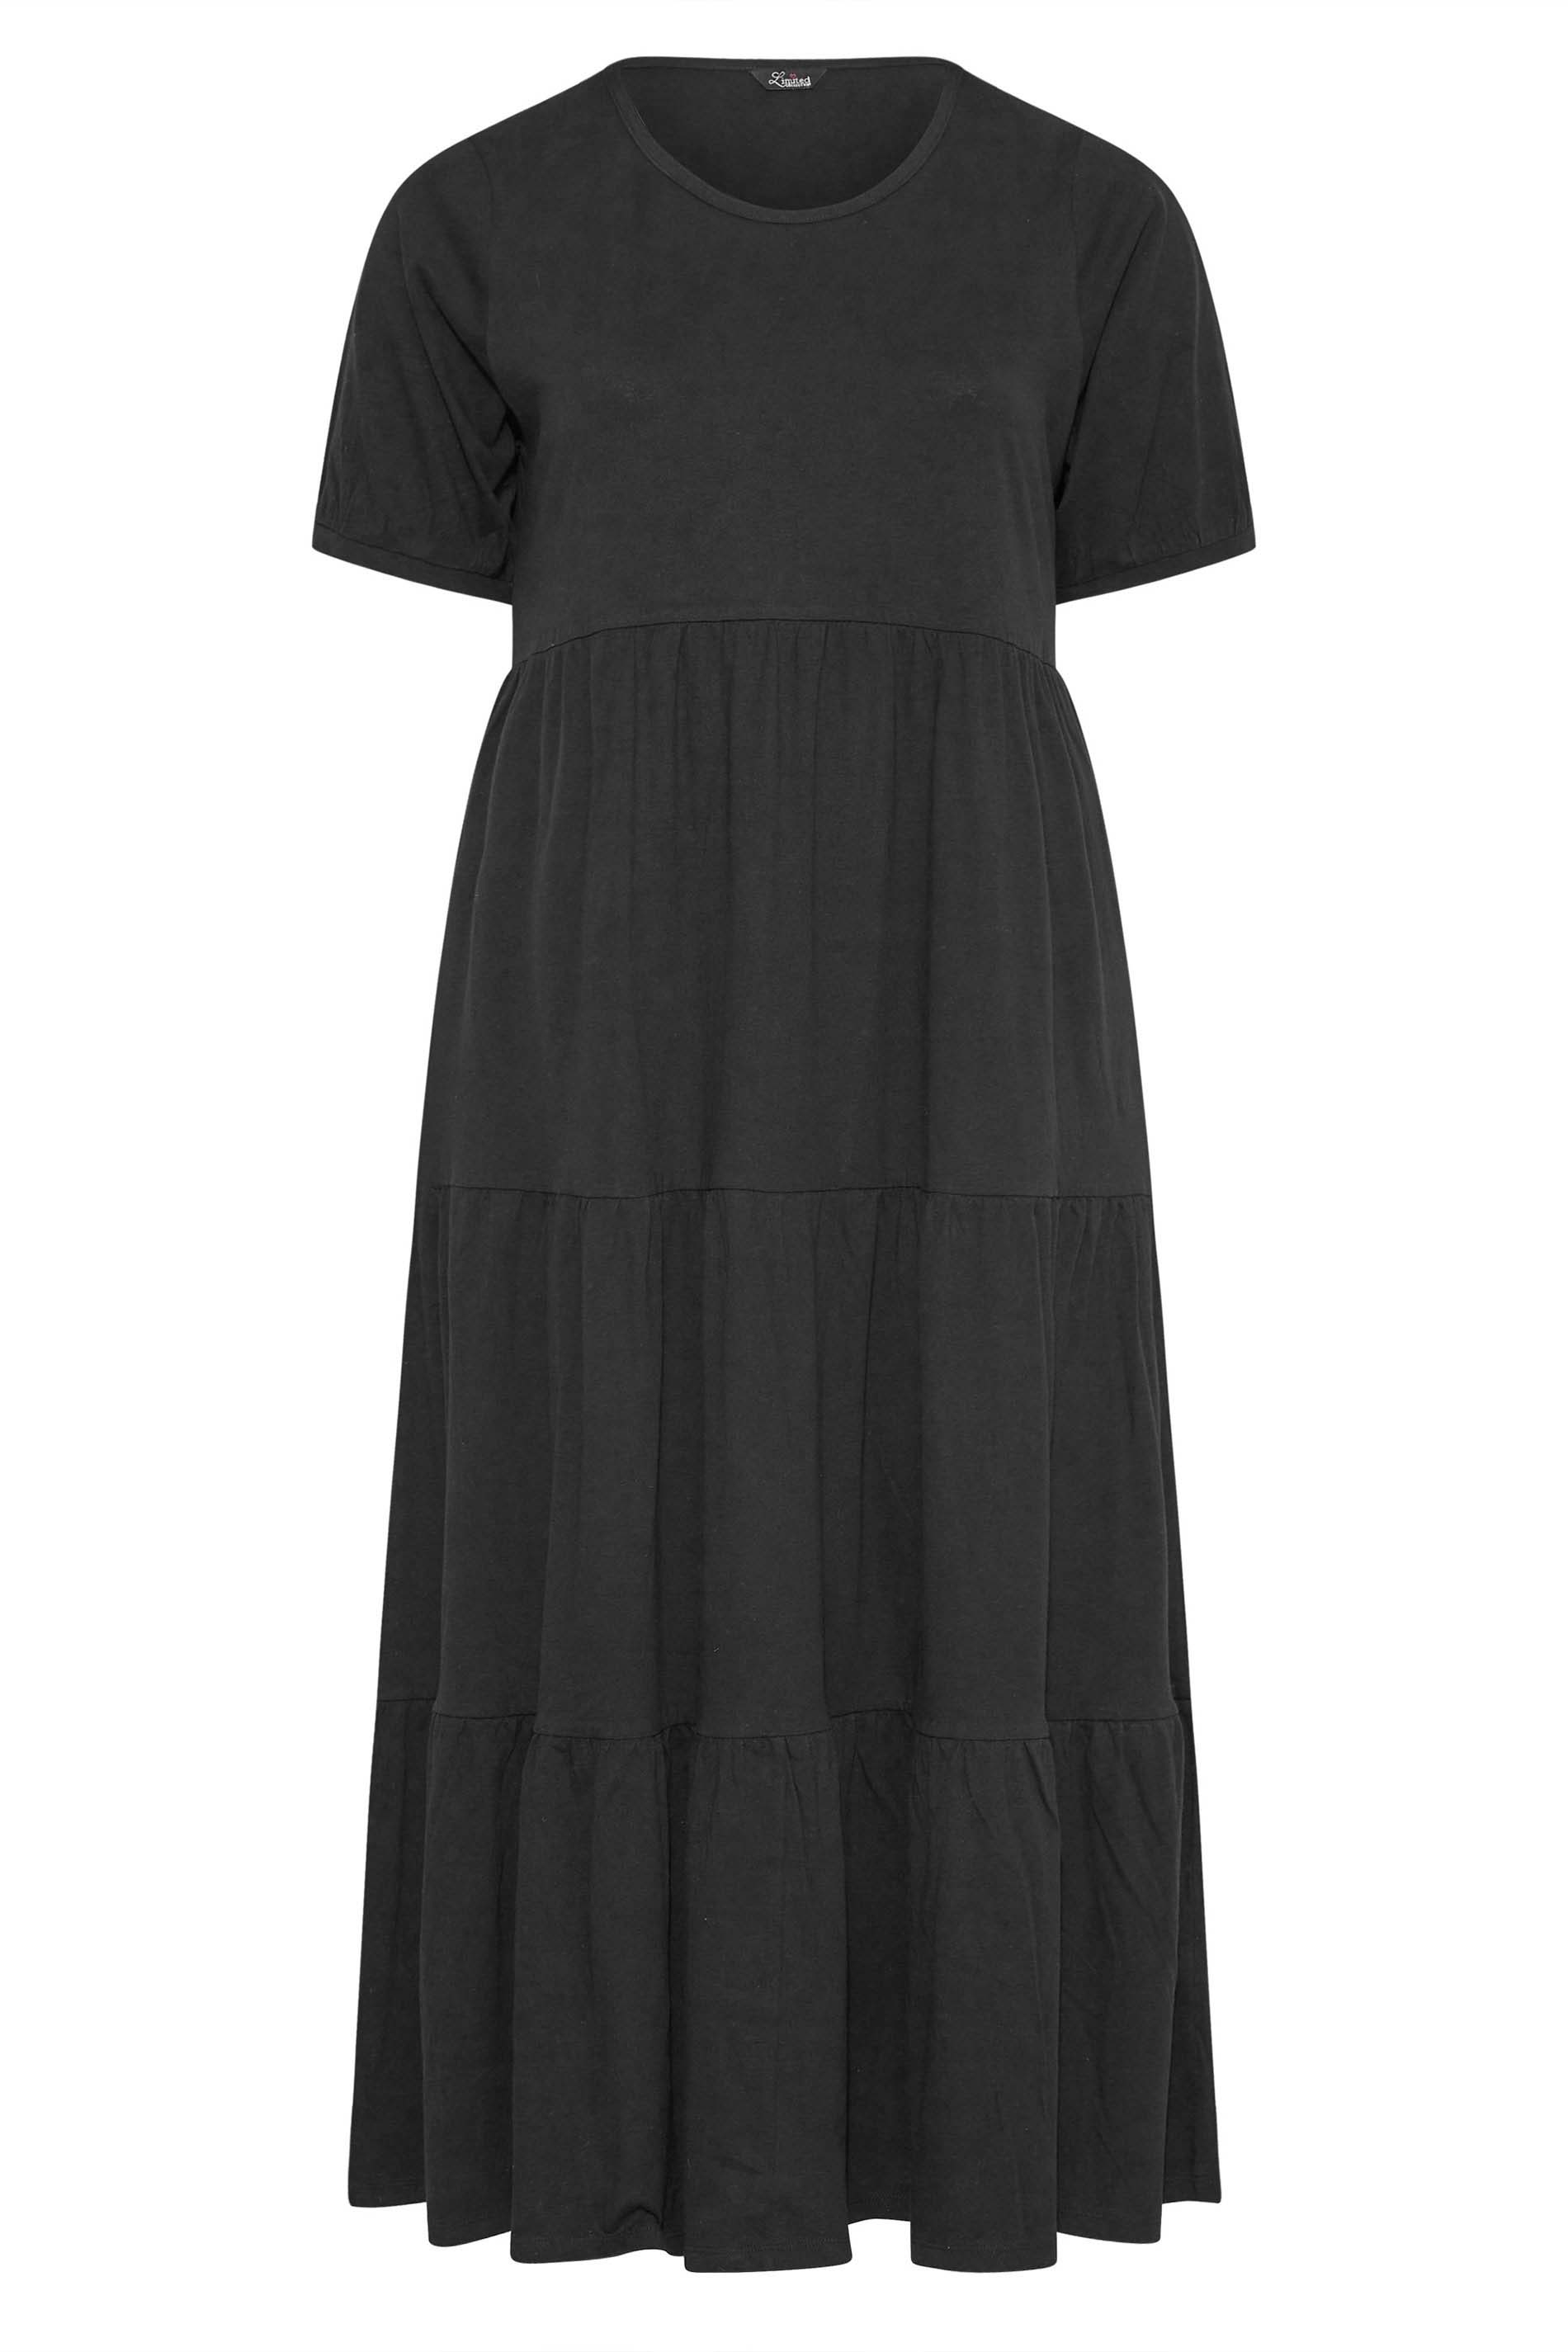 LIMITED COLLECTION Plus Size Black Tiered Smock Dress | Yours Clothing